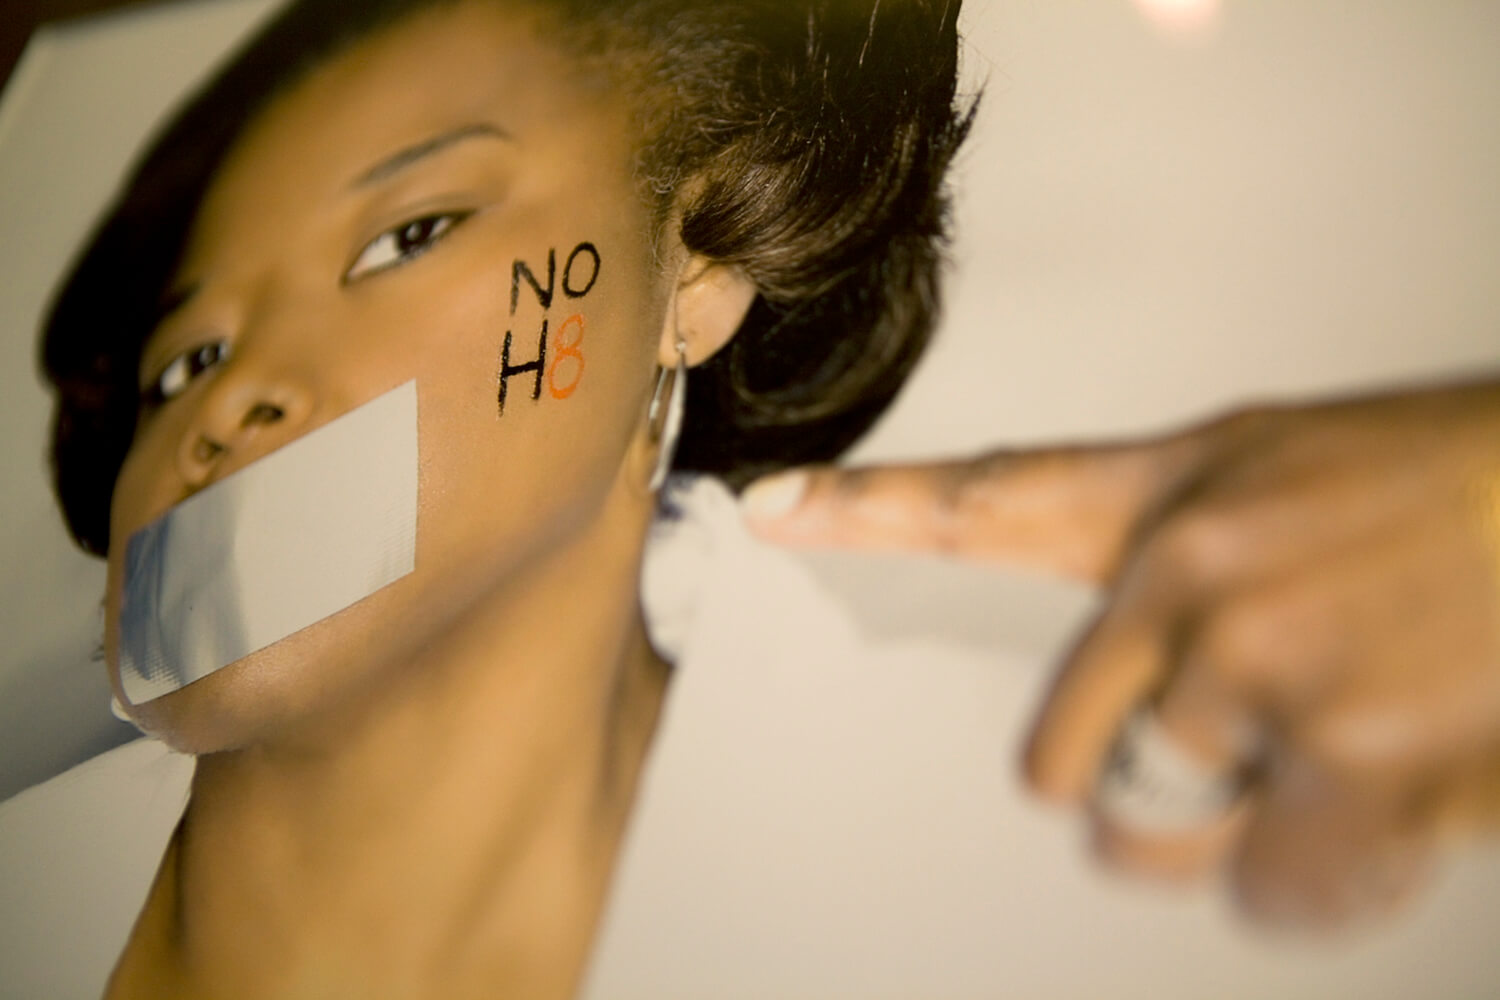 Still from The New Black. A photo of a poster with a picture of a person who has duct tape over their mouth and the words "NO H8" written on their cheek.